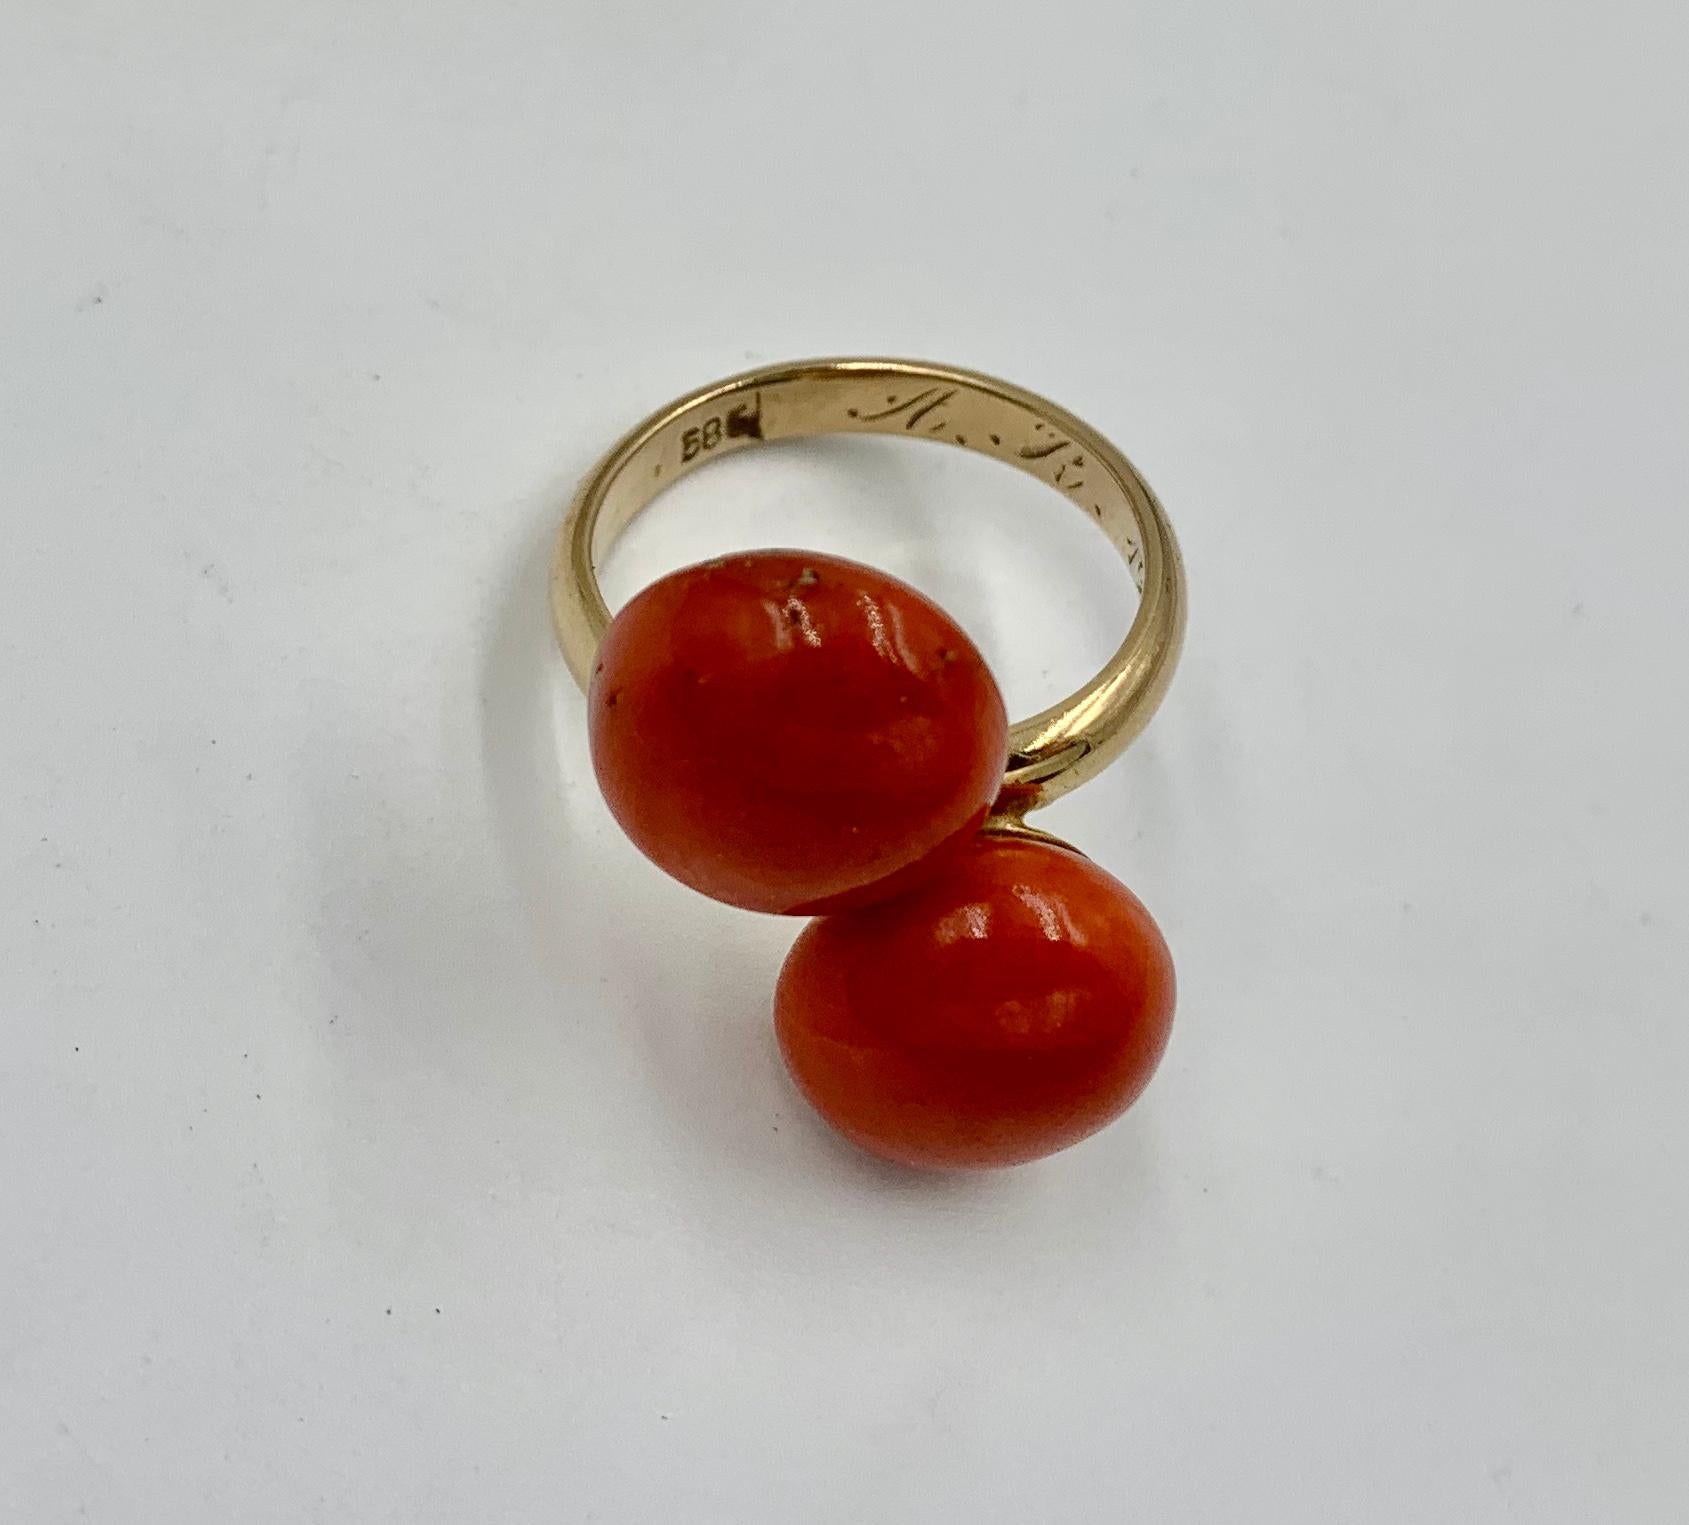 Women's Art Deco Coral Ring 14 Karat Gold Red Salmon Coral Cabochon, 1924 For Sale